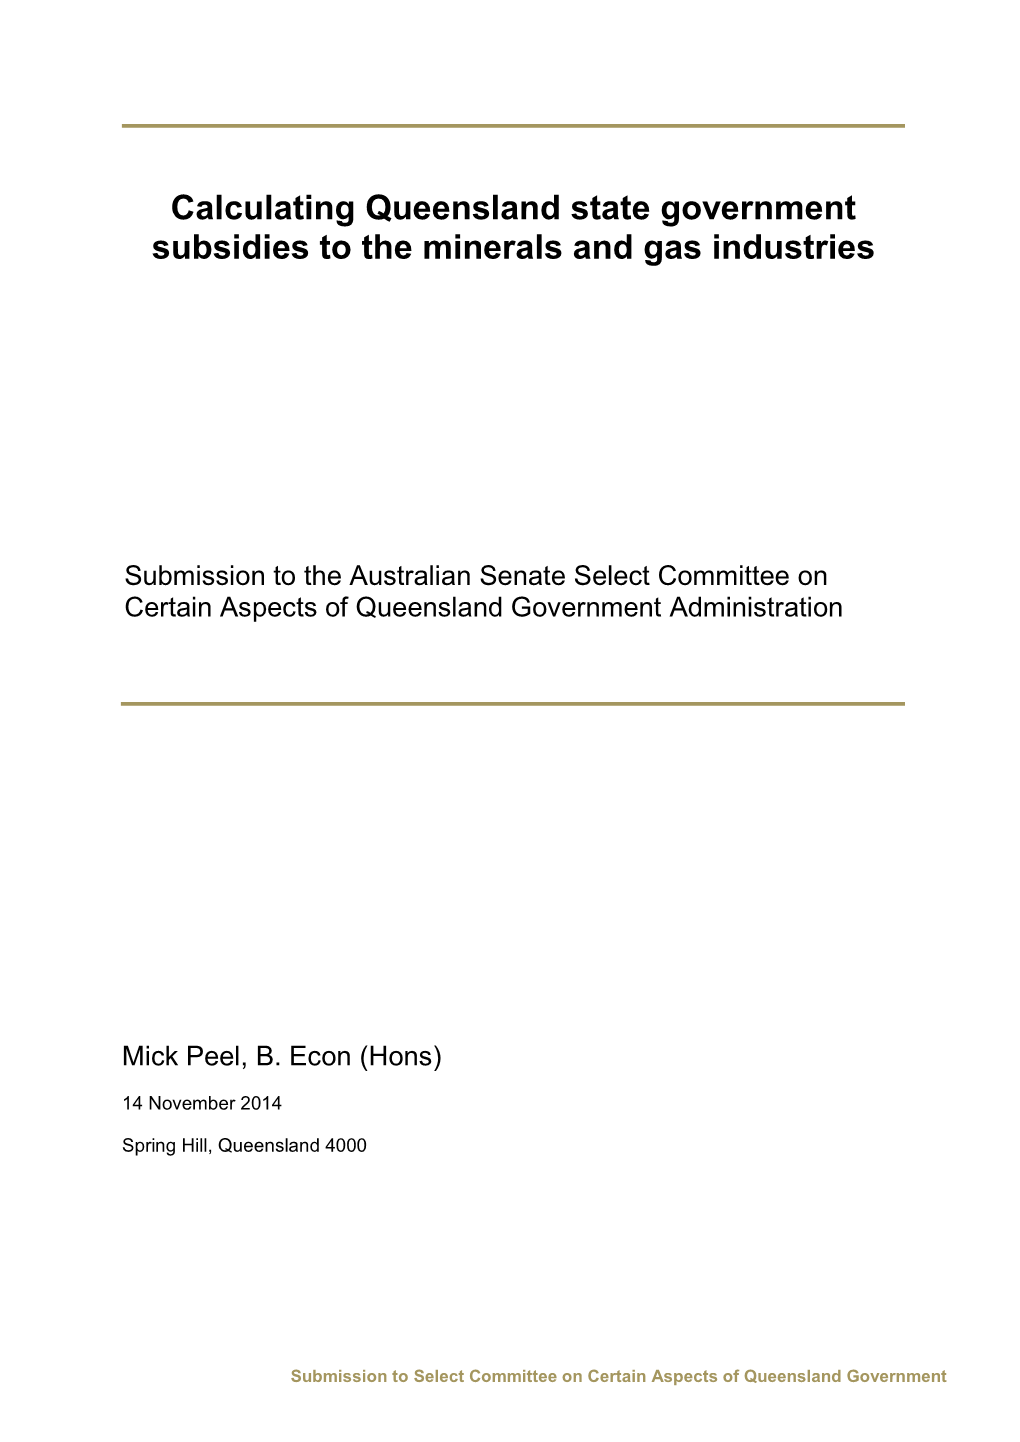 Calculating Queensland State Government Subsidies to the Minerals and Gas Industries